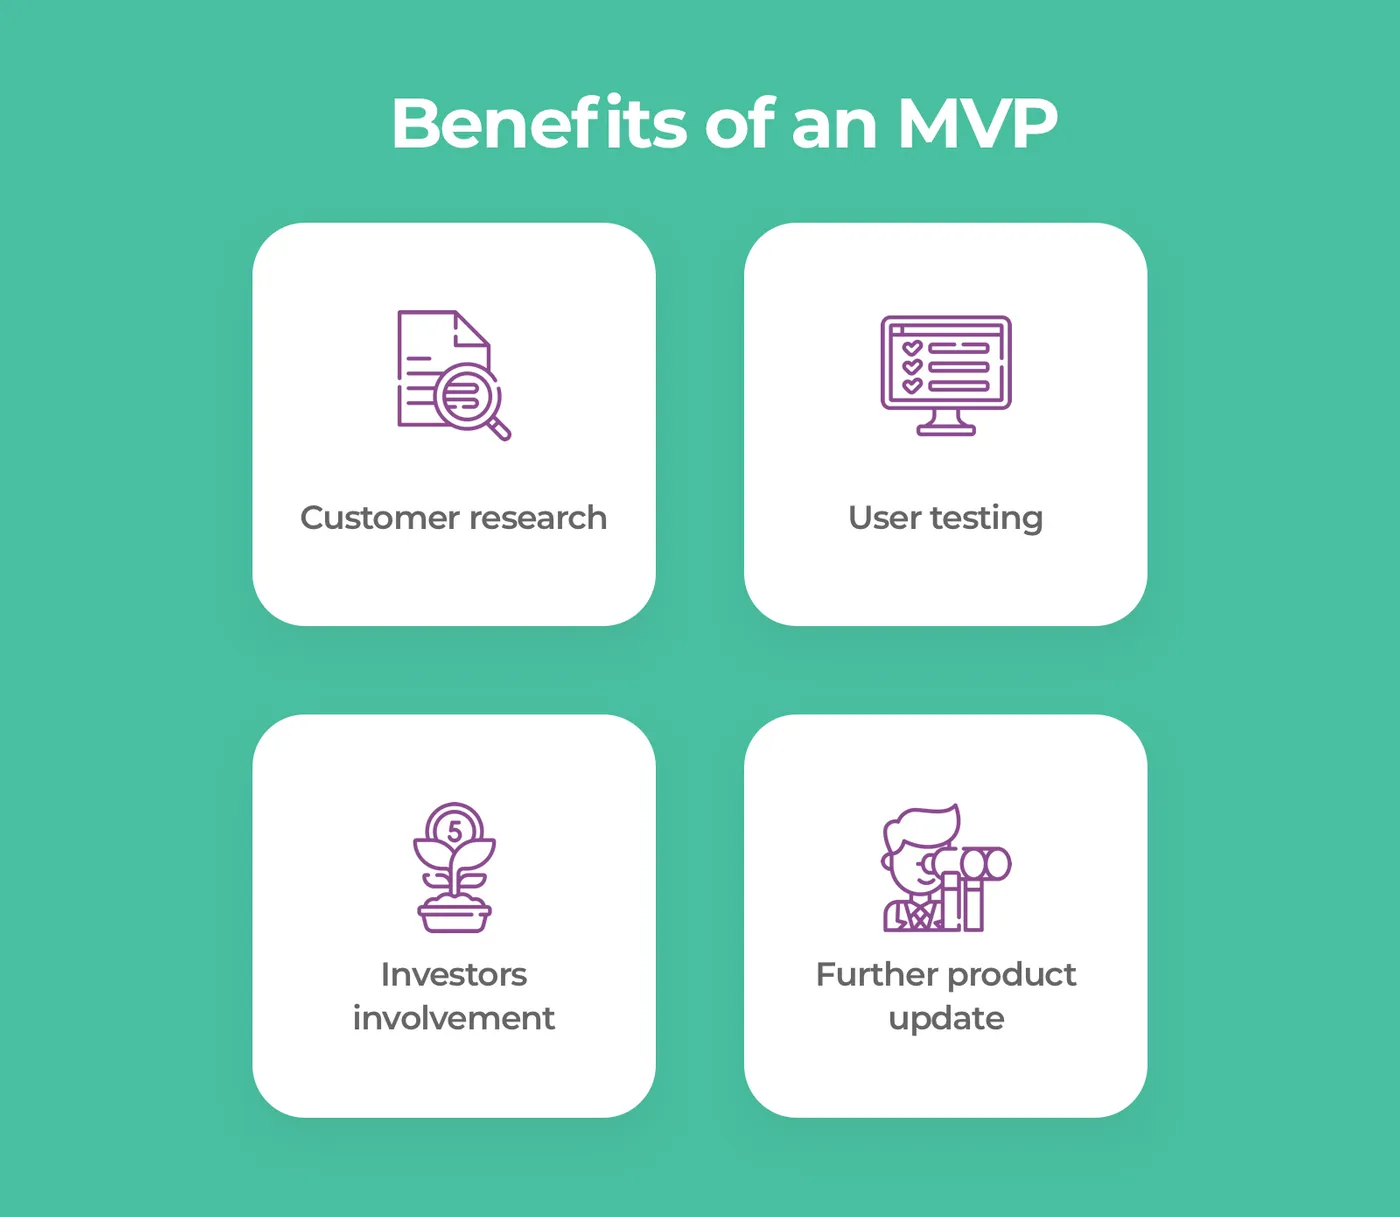 How to use an MVP